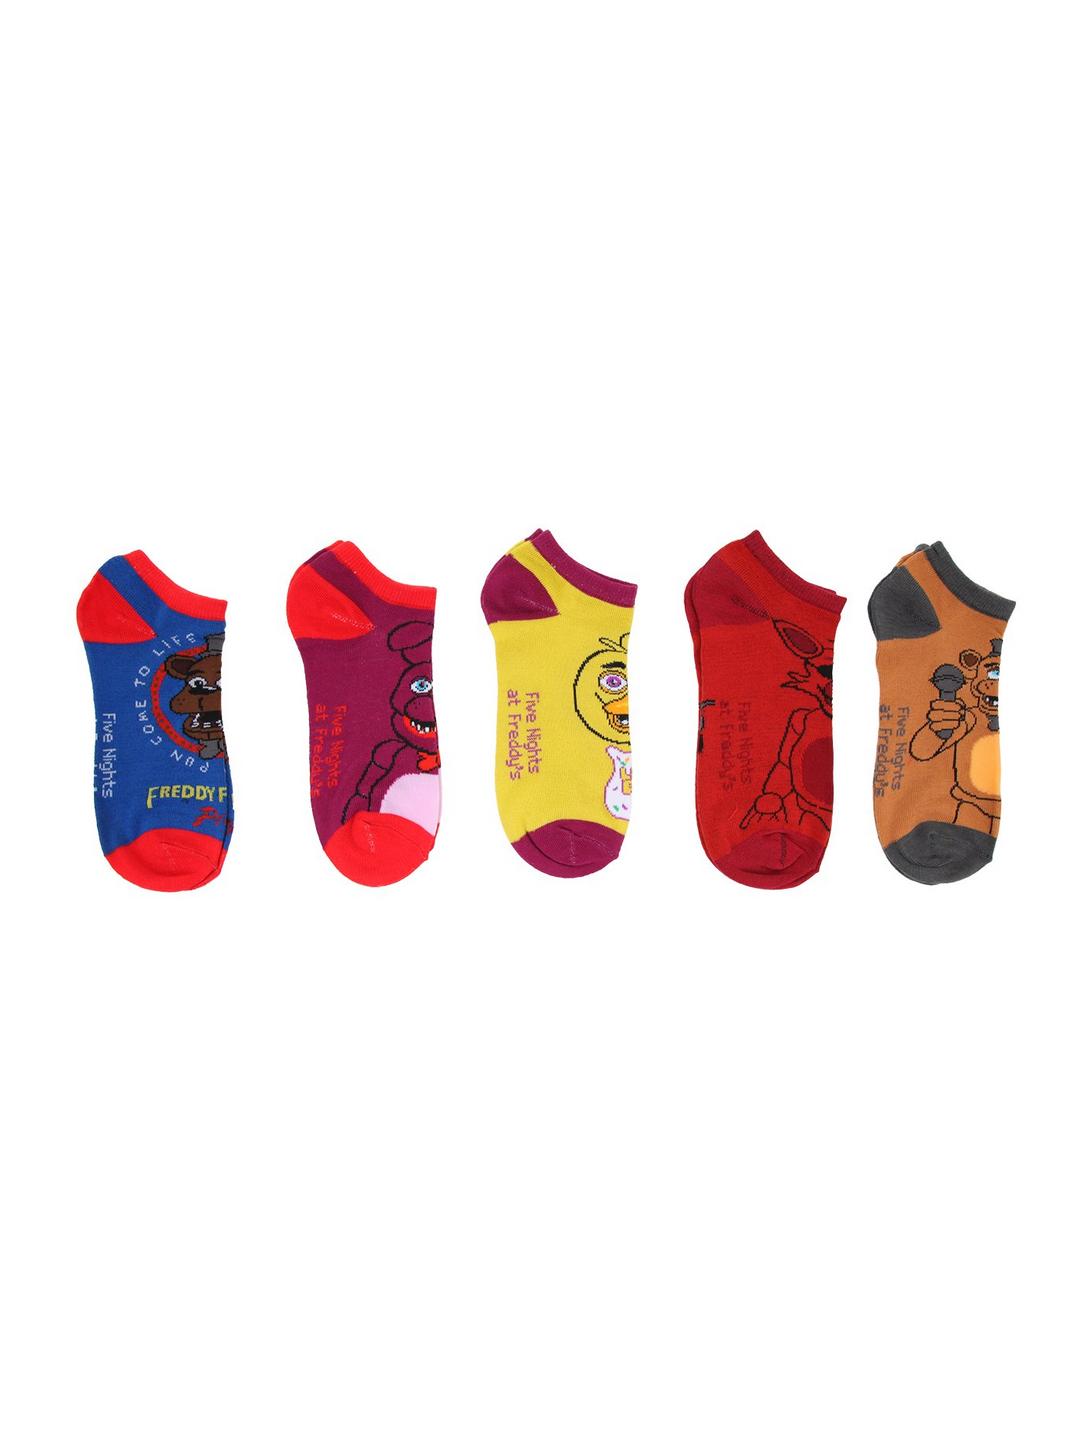 Five Nights At Freddy’s Mix & Match Ankle Socks 5 Pair, , hi-res